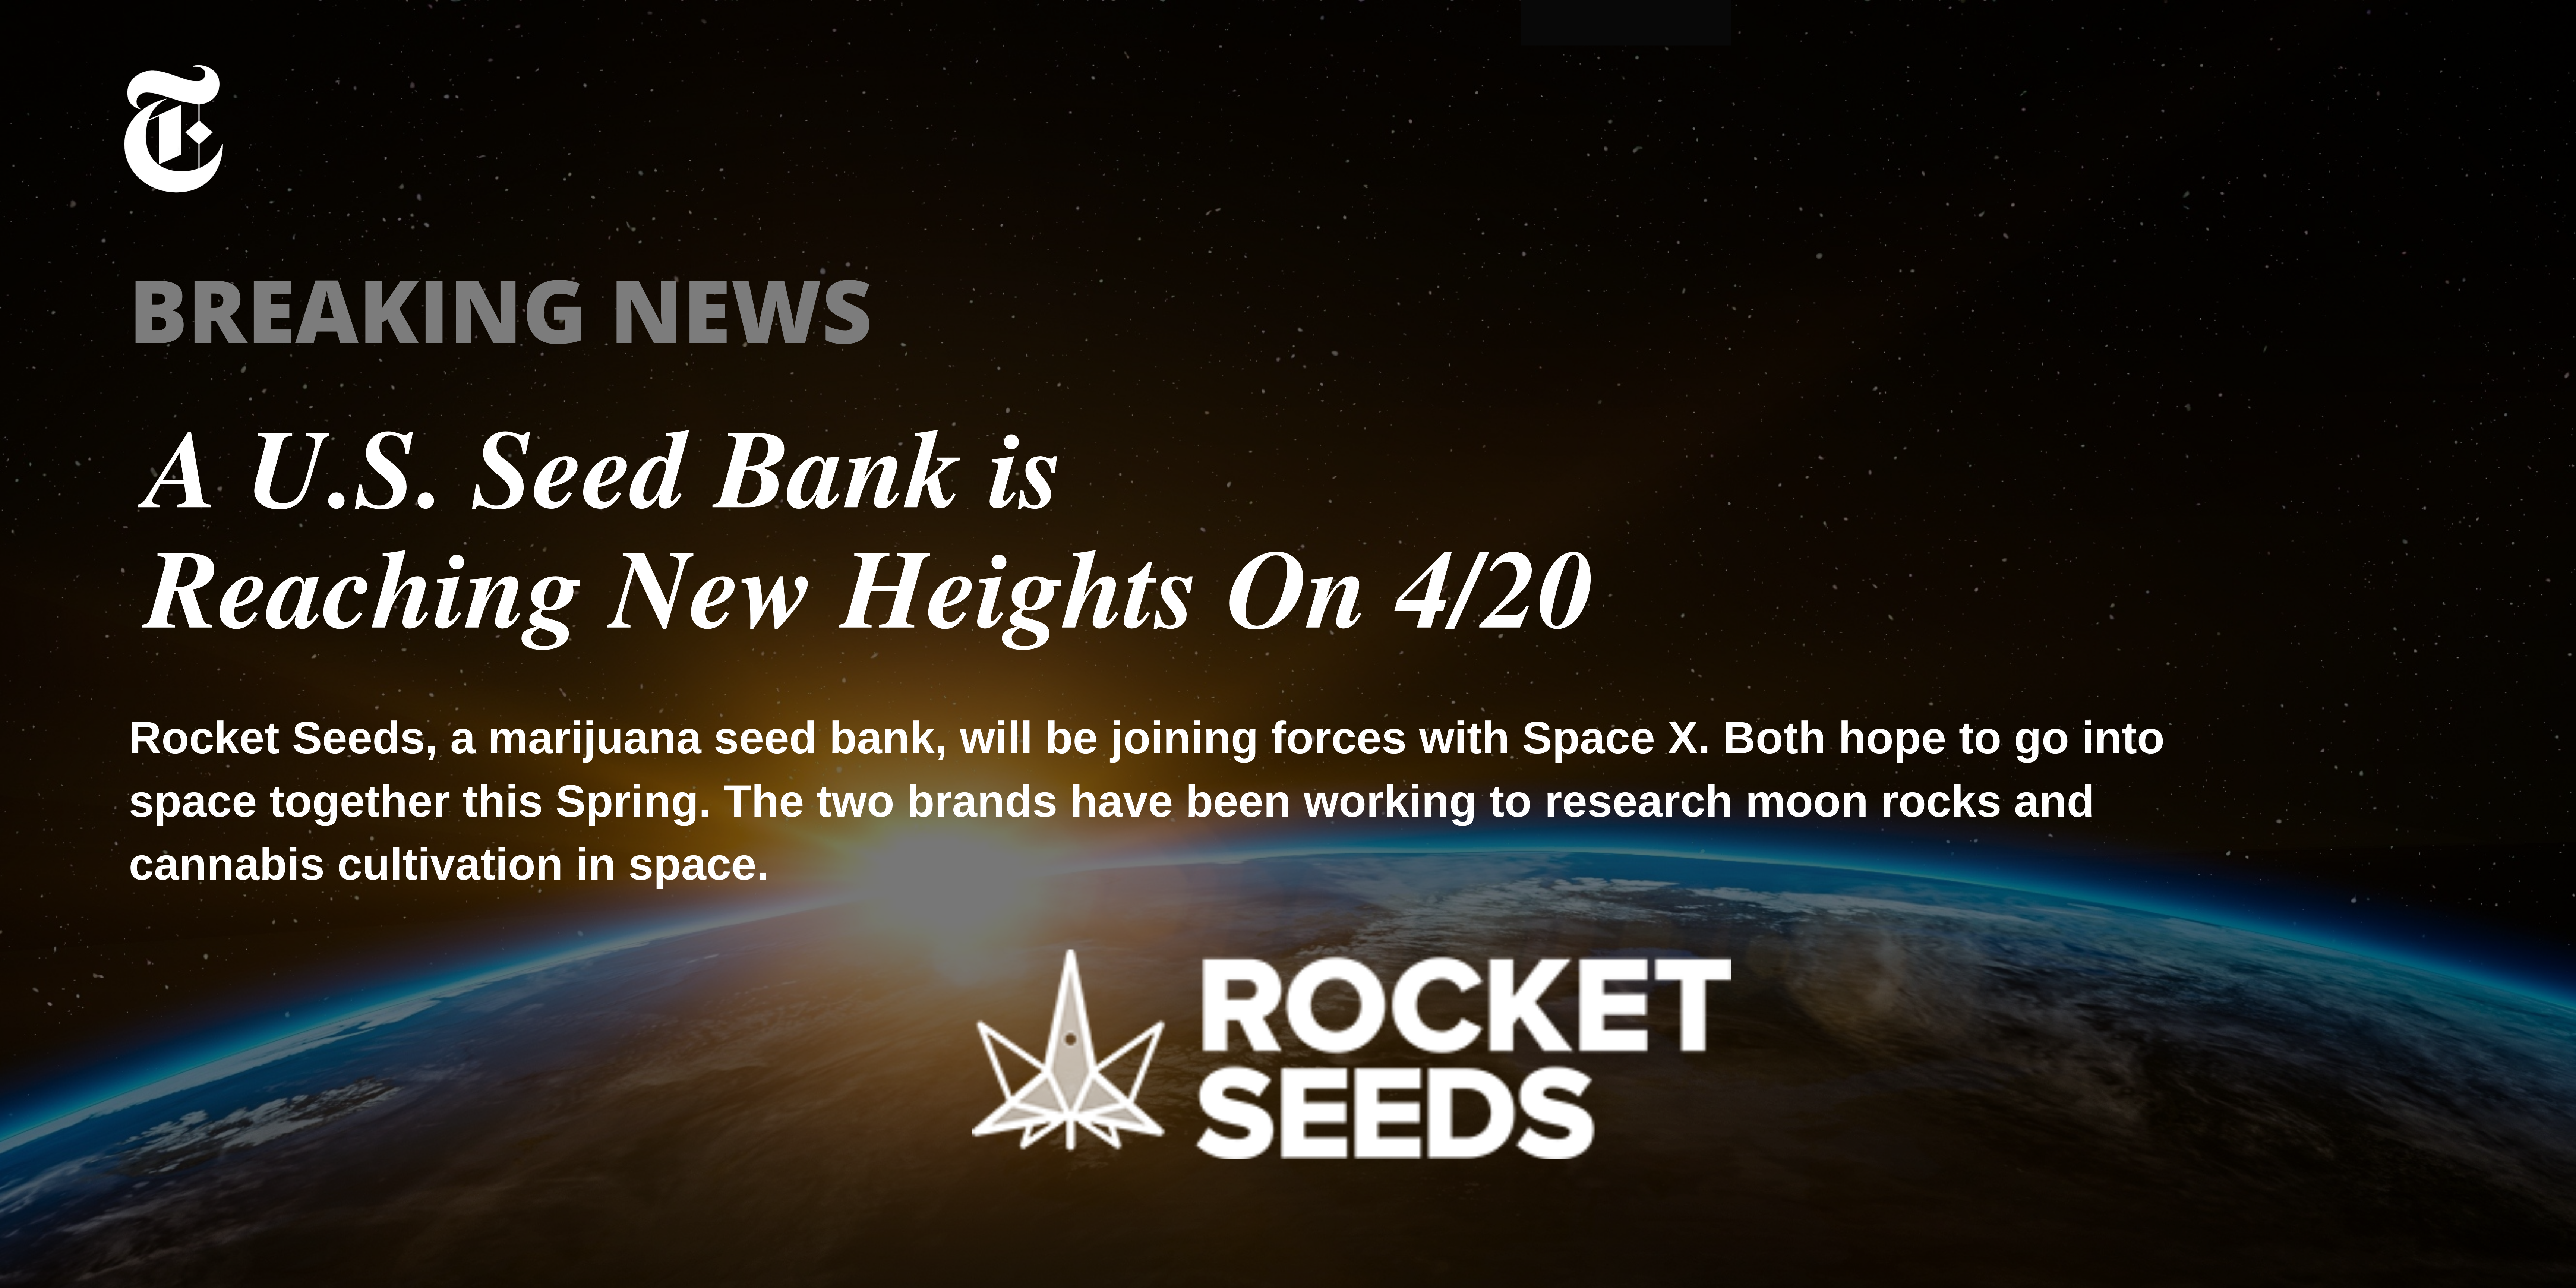 Rocket Seeds Will Be Joining Space X on a Mission